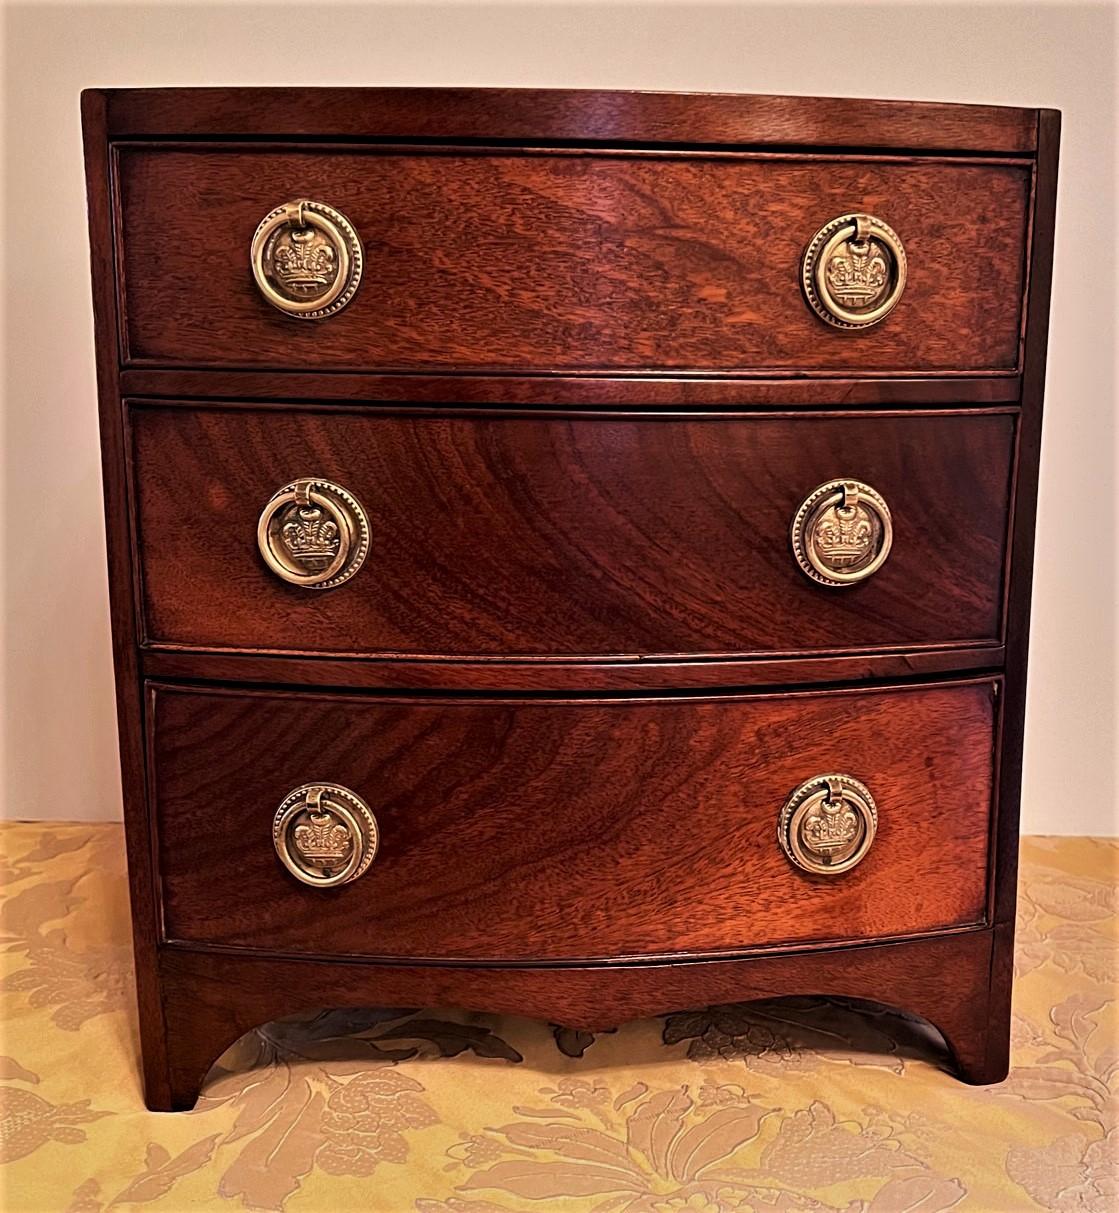 This charming little chest was hand made as a cabinet maker's sample, or more likely as a toy chest for a very privileged little girl to keep her doll's clothes in. It was made in a very skilled cabinet maker's shop using leftover mahogany from